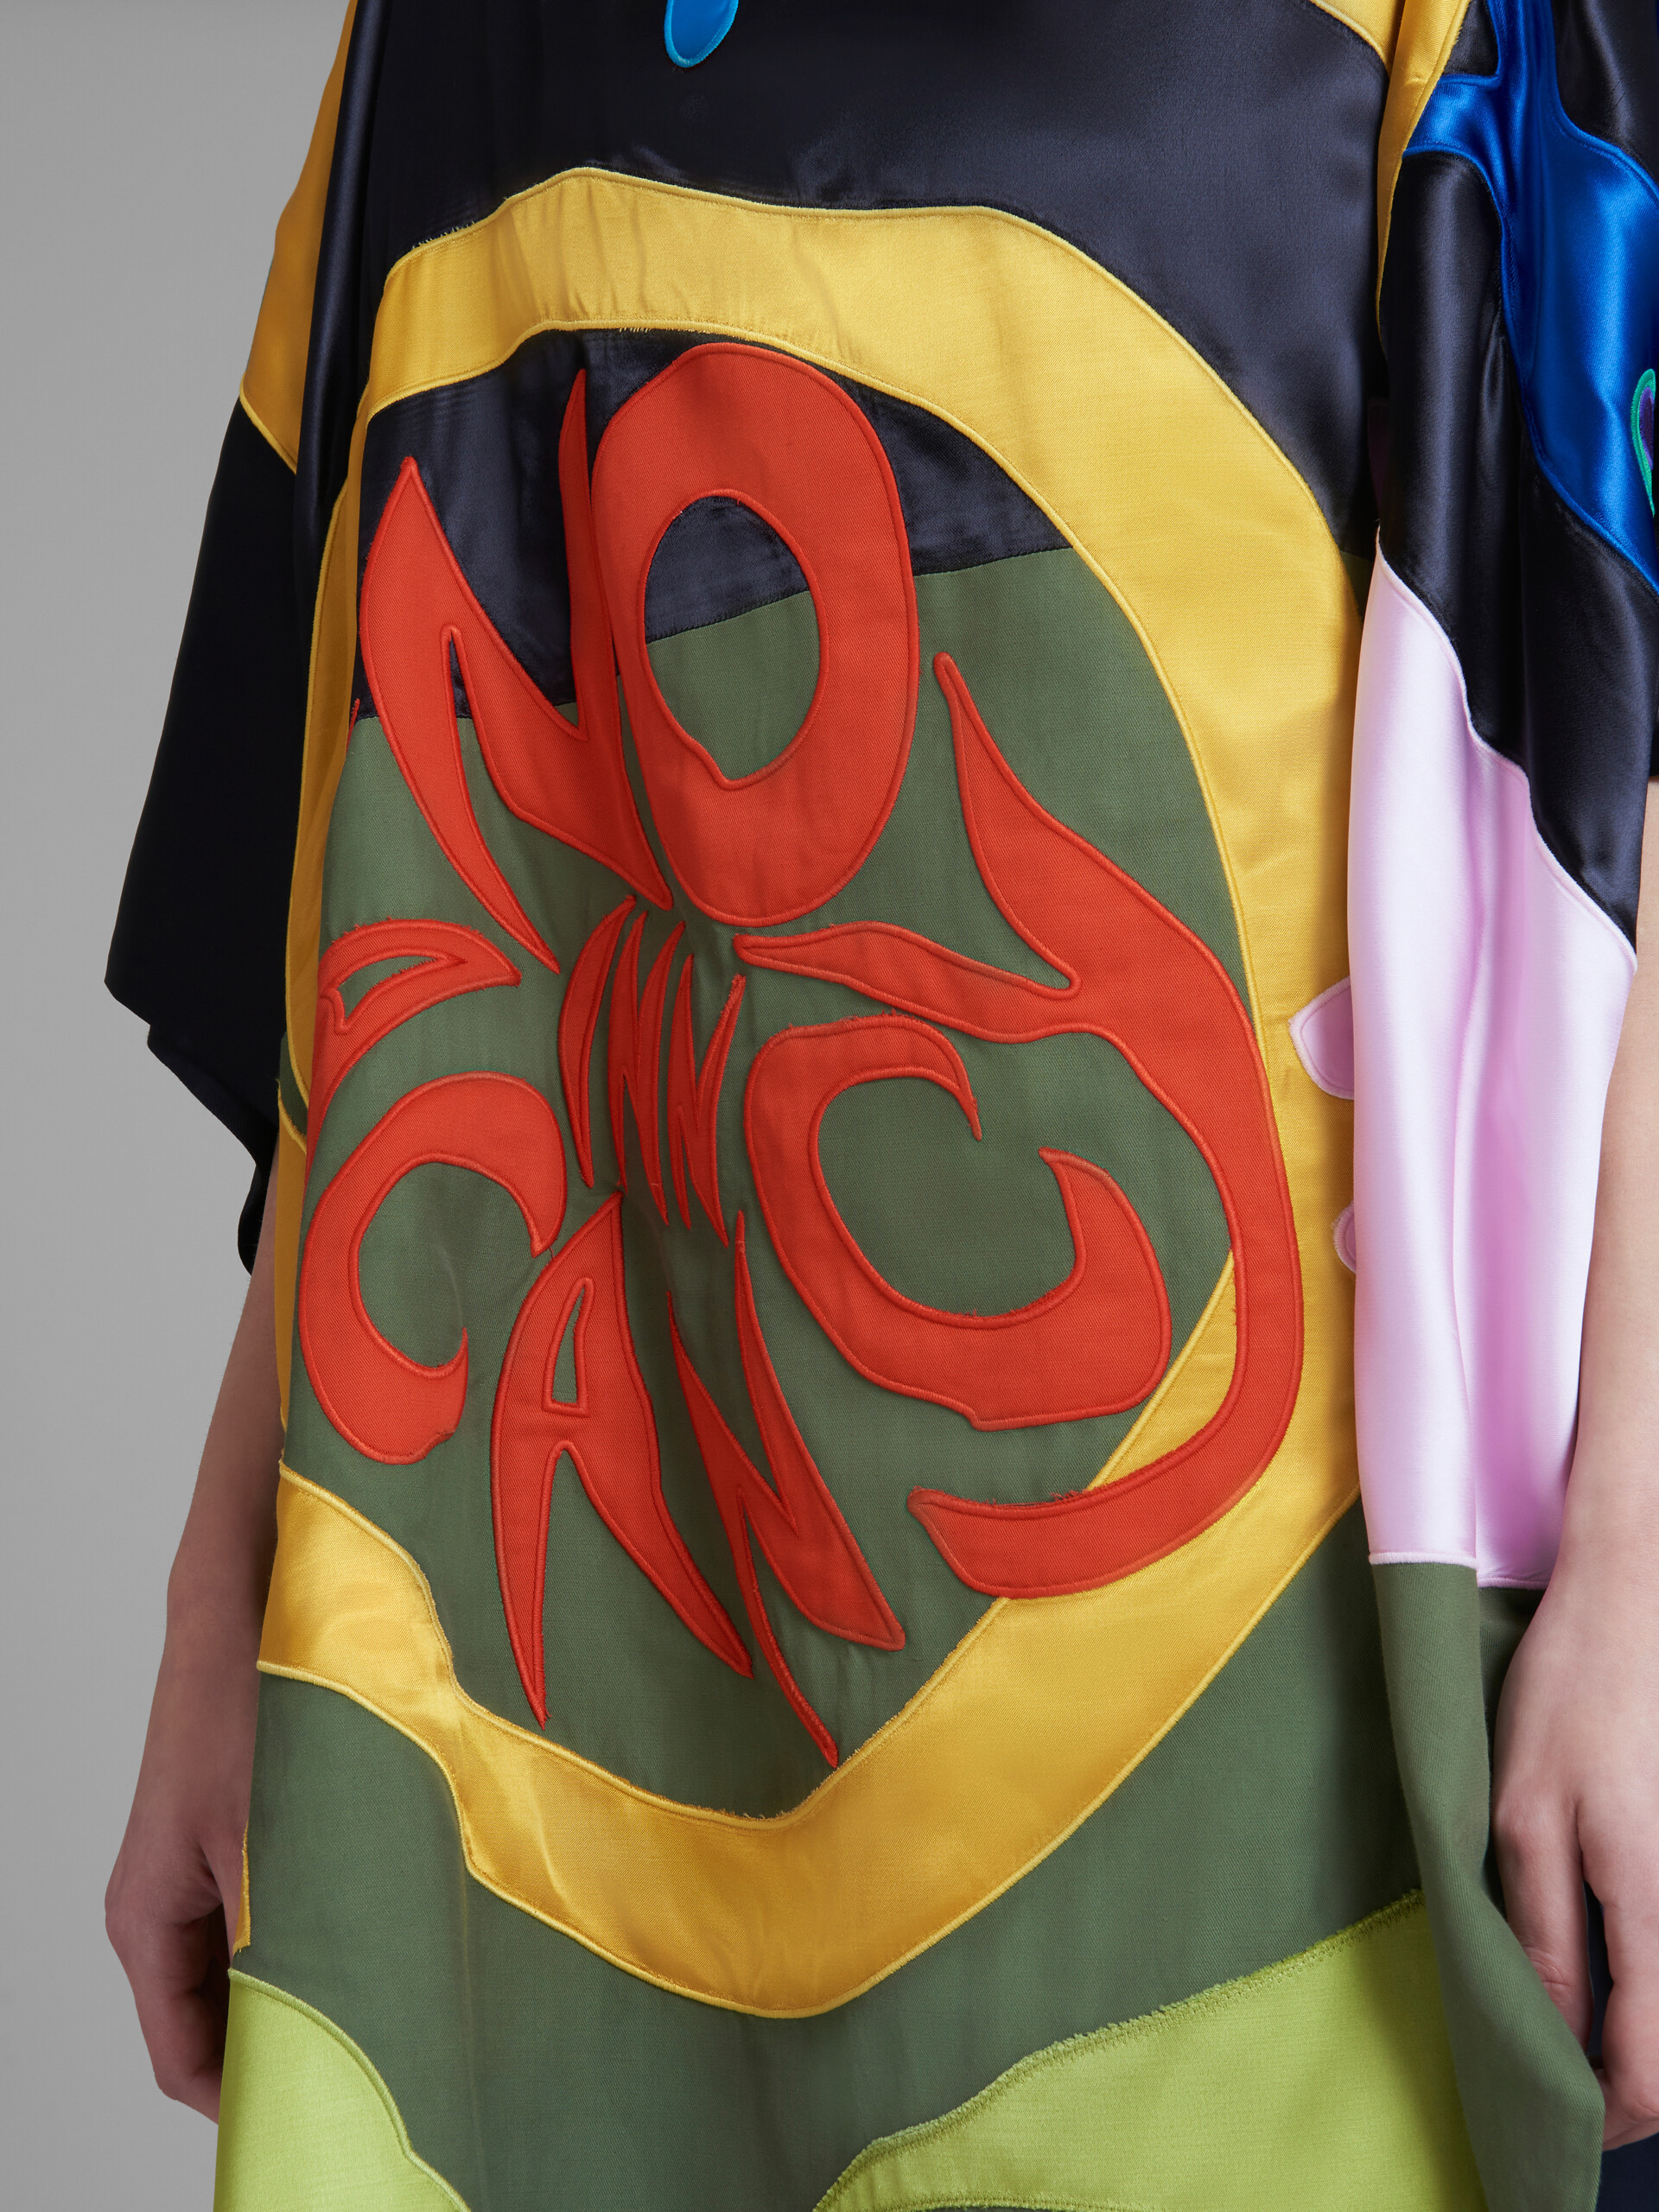 Marni x No Vacancy Inn - Cape top with multicolour patchwork motifs - Shirts - Image 5